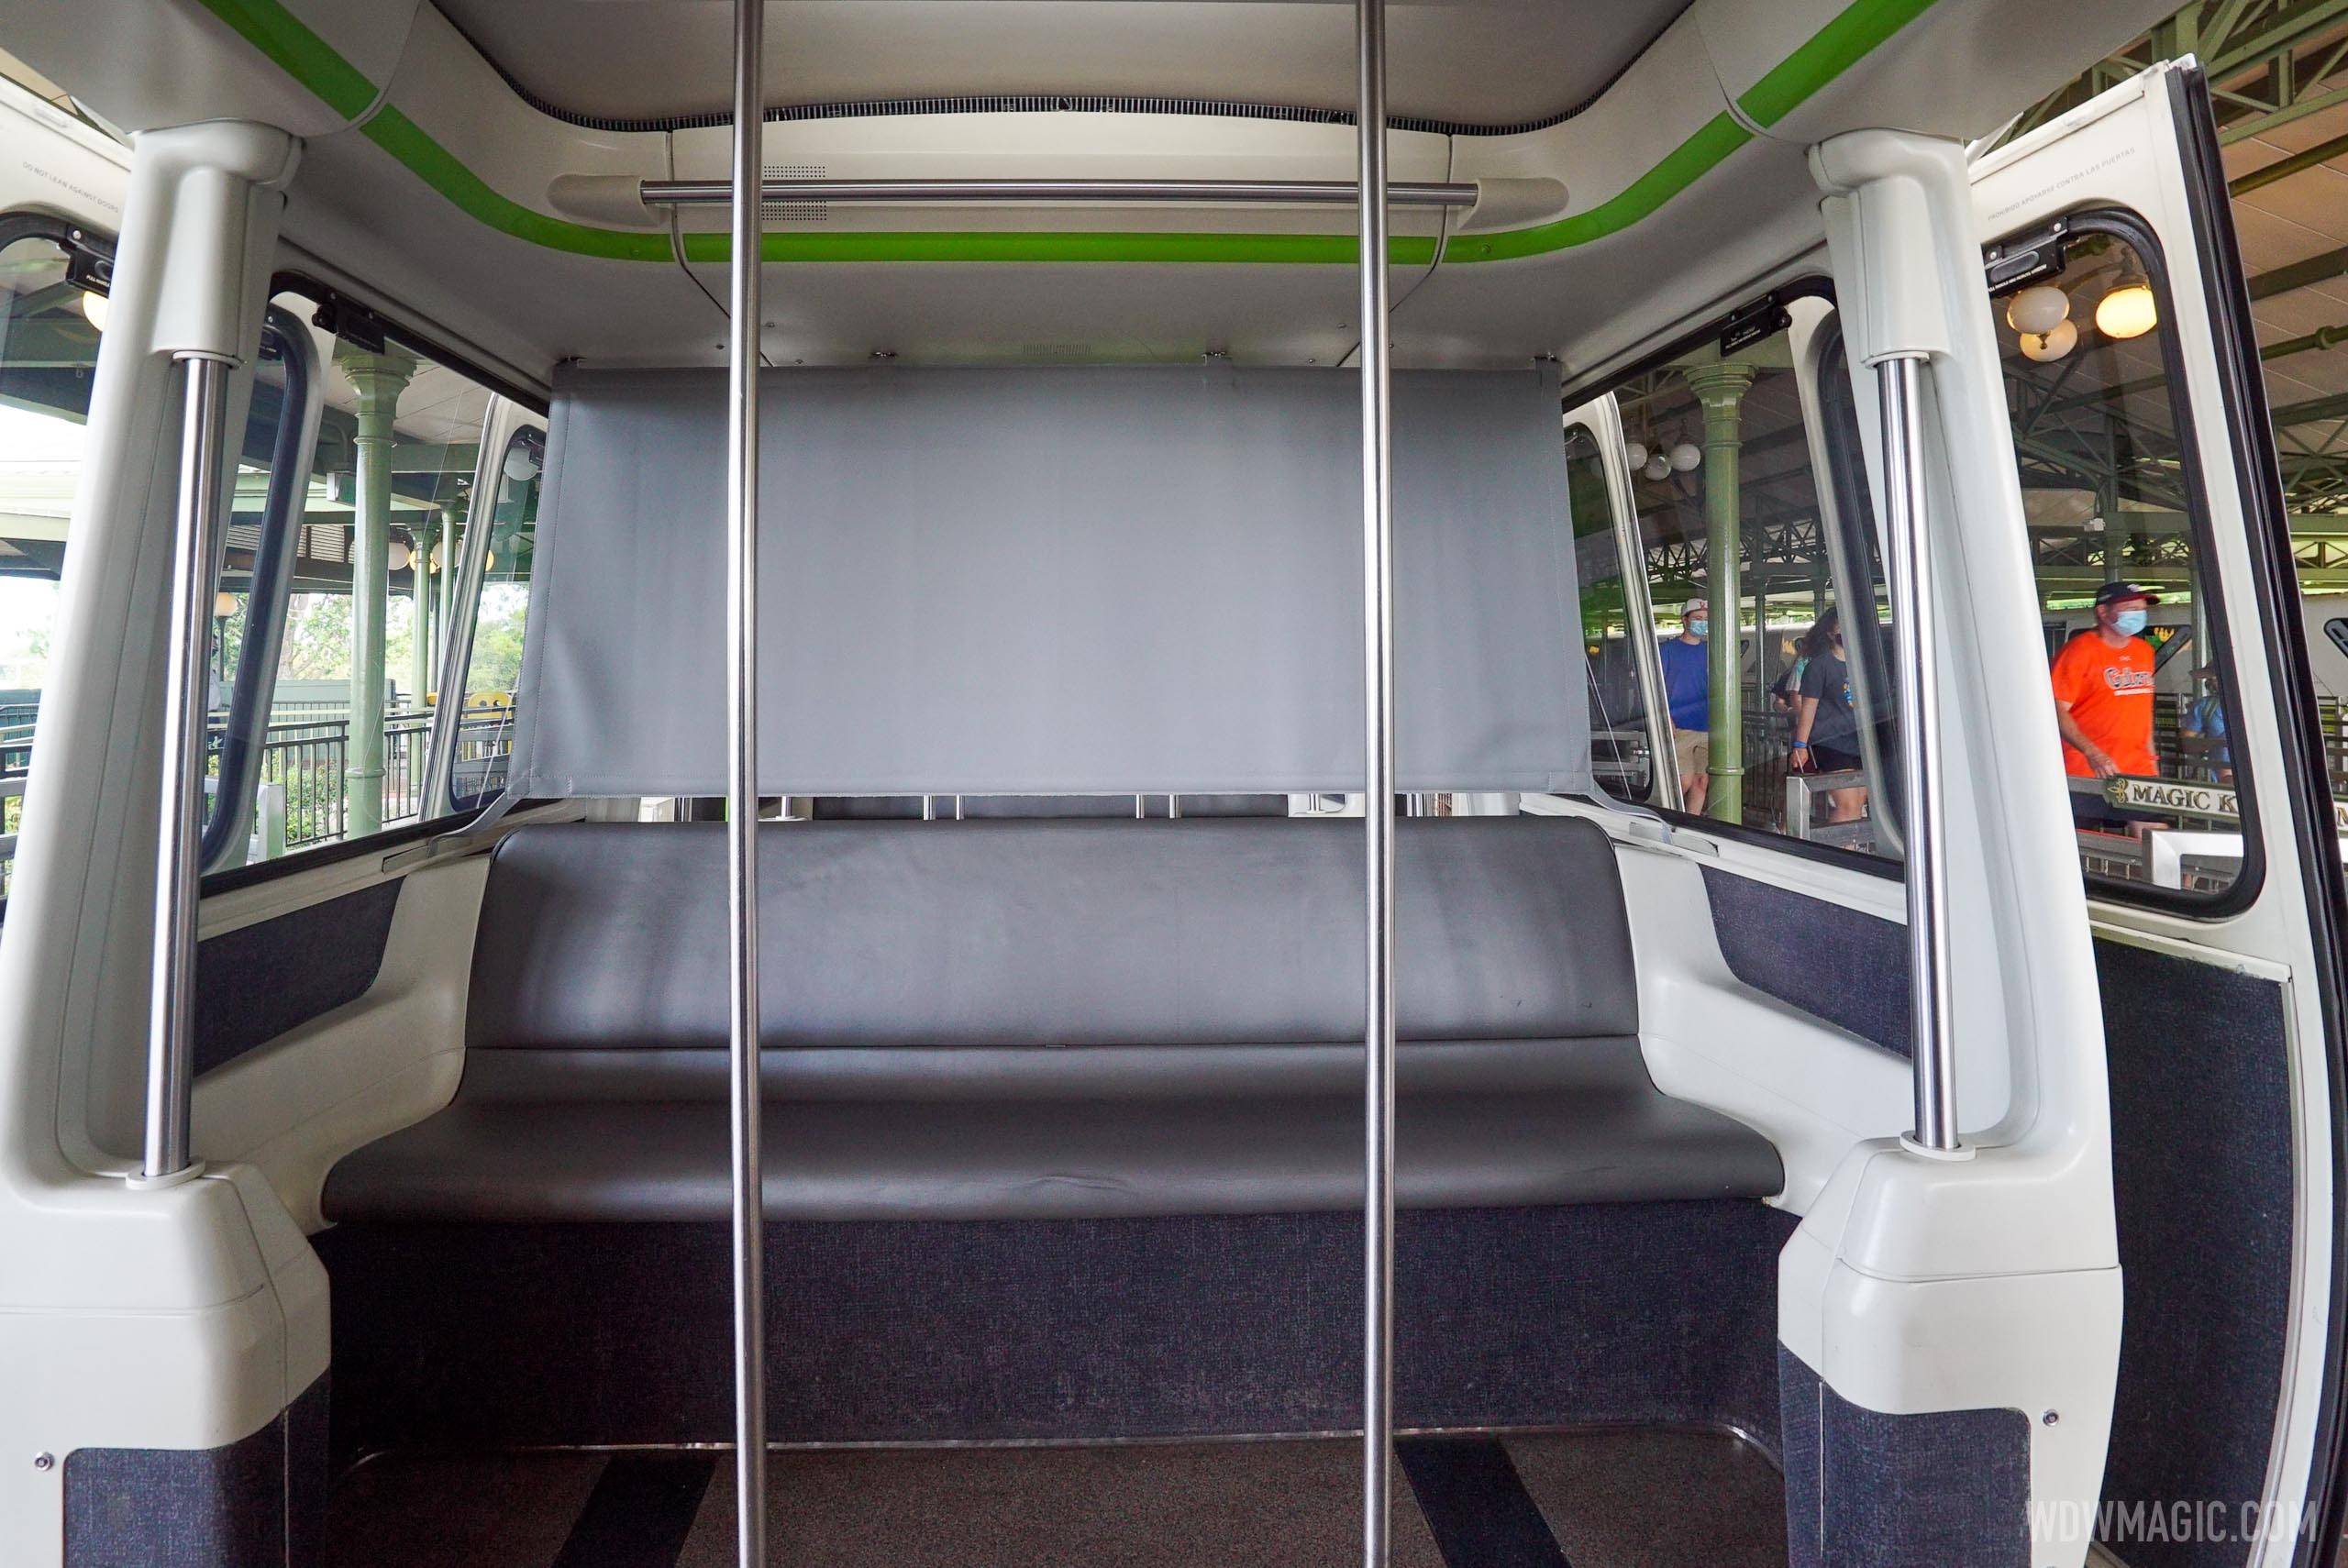 Screens separate the sections of the monorail